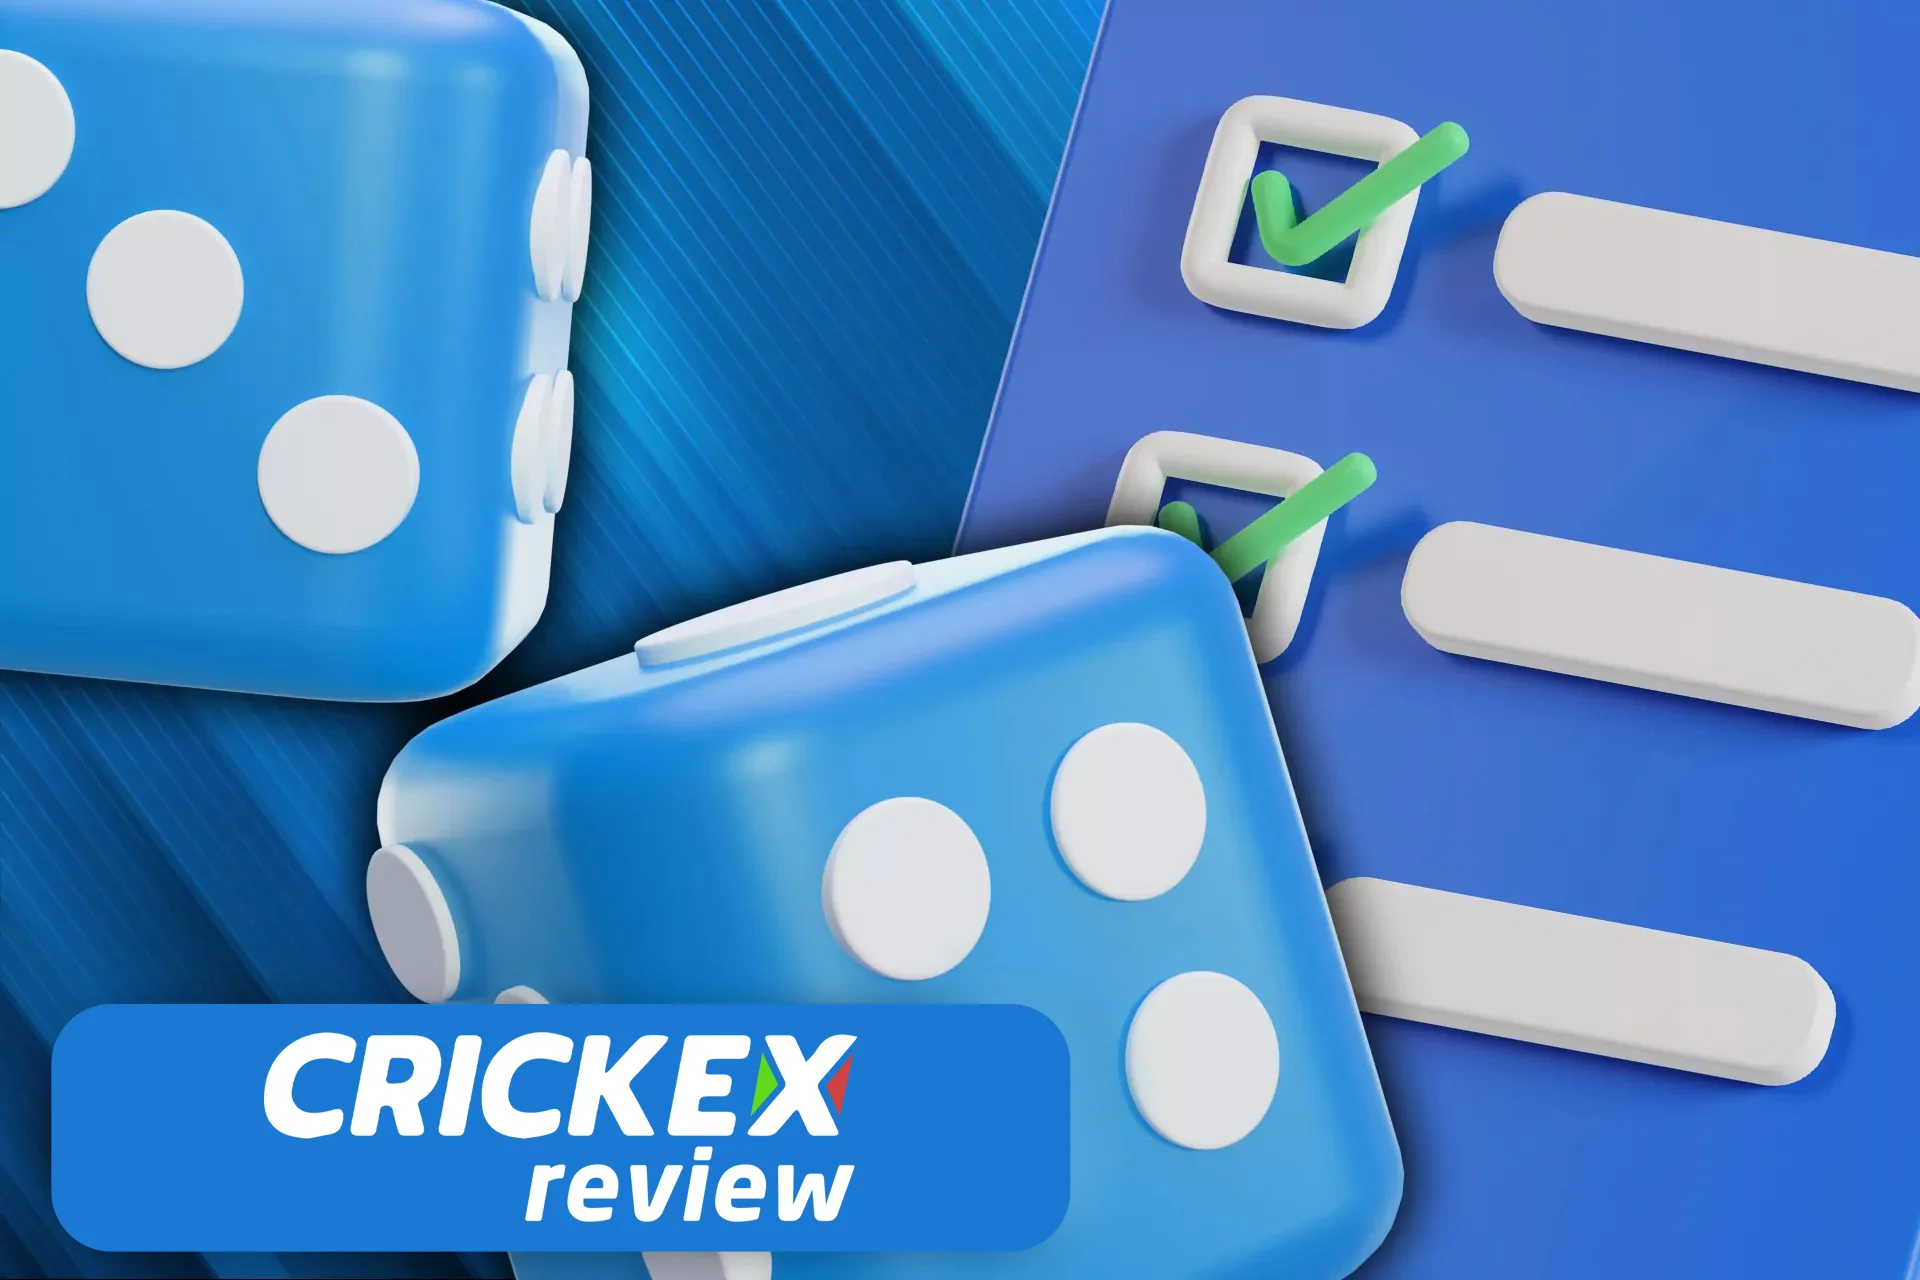 All the gamers should understand that Crickex gambling is not a way to earn money.